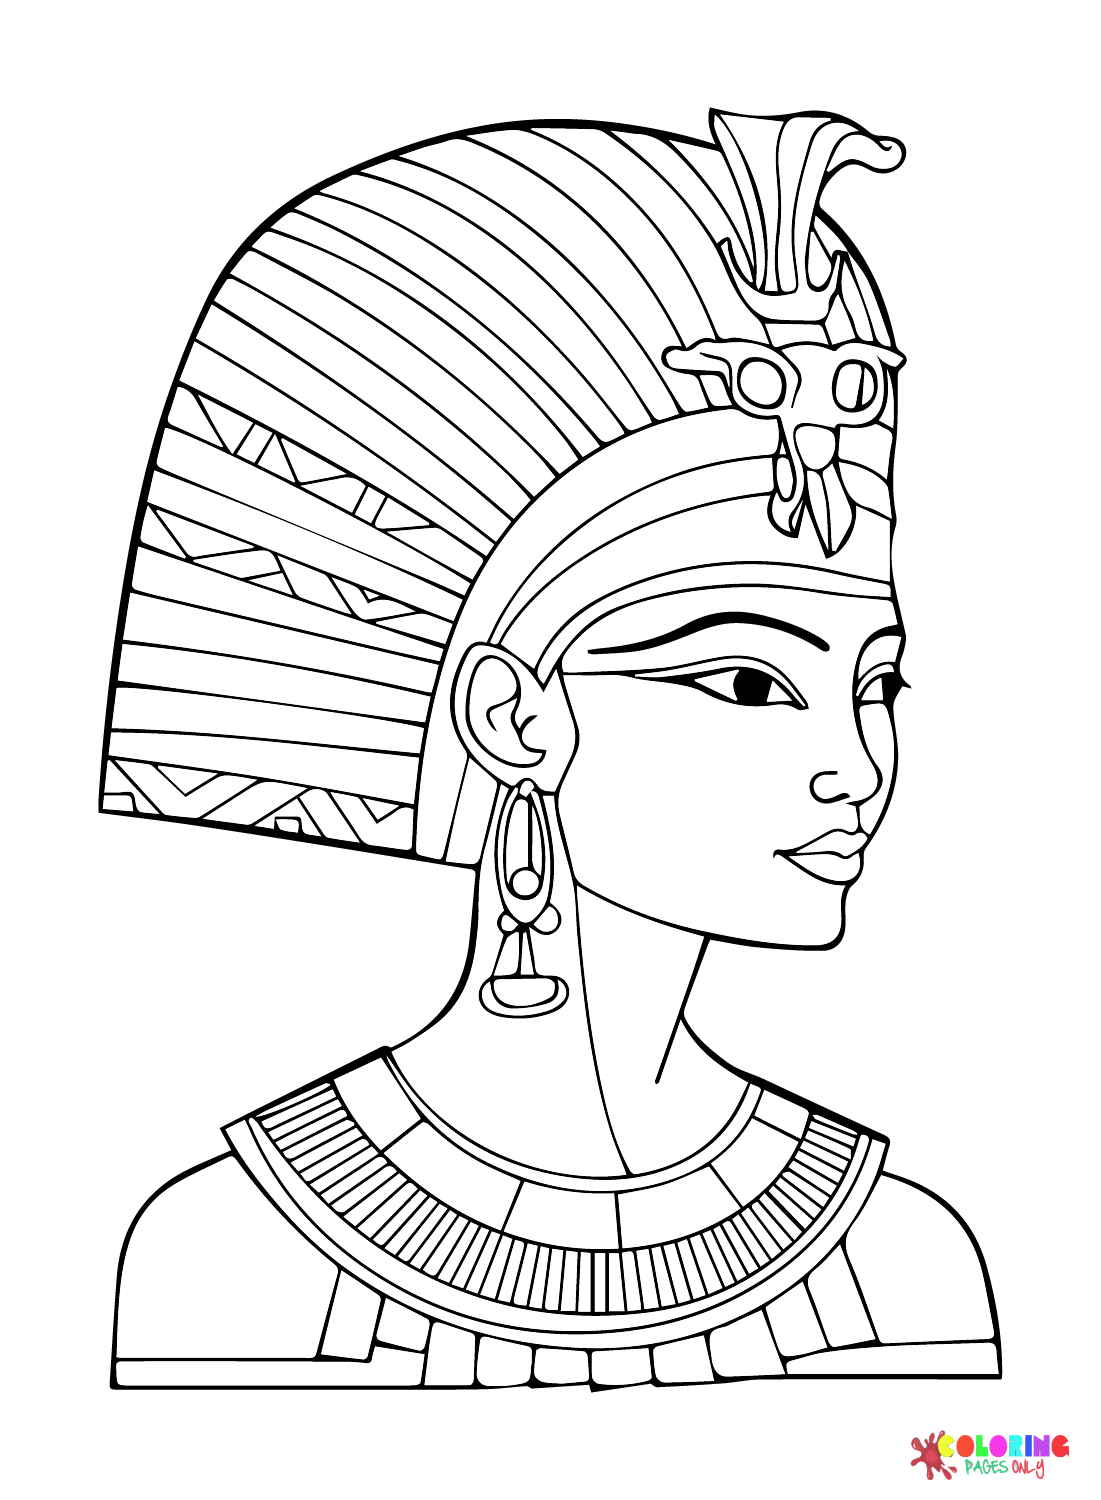 Ancient Egypt Coloring Pages Printable for Free Download